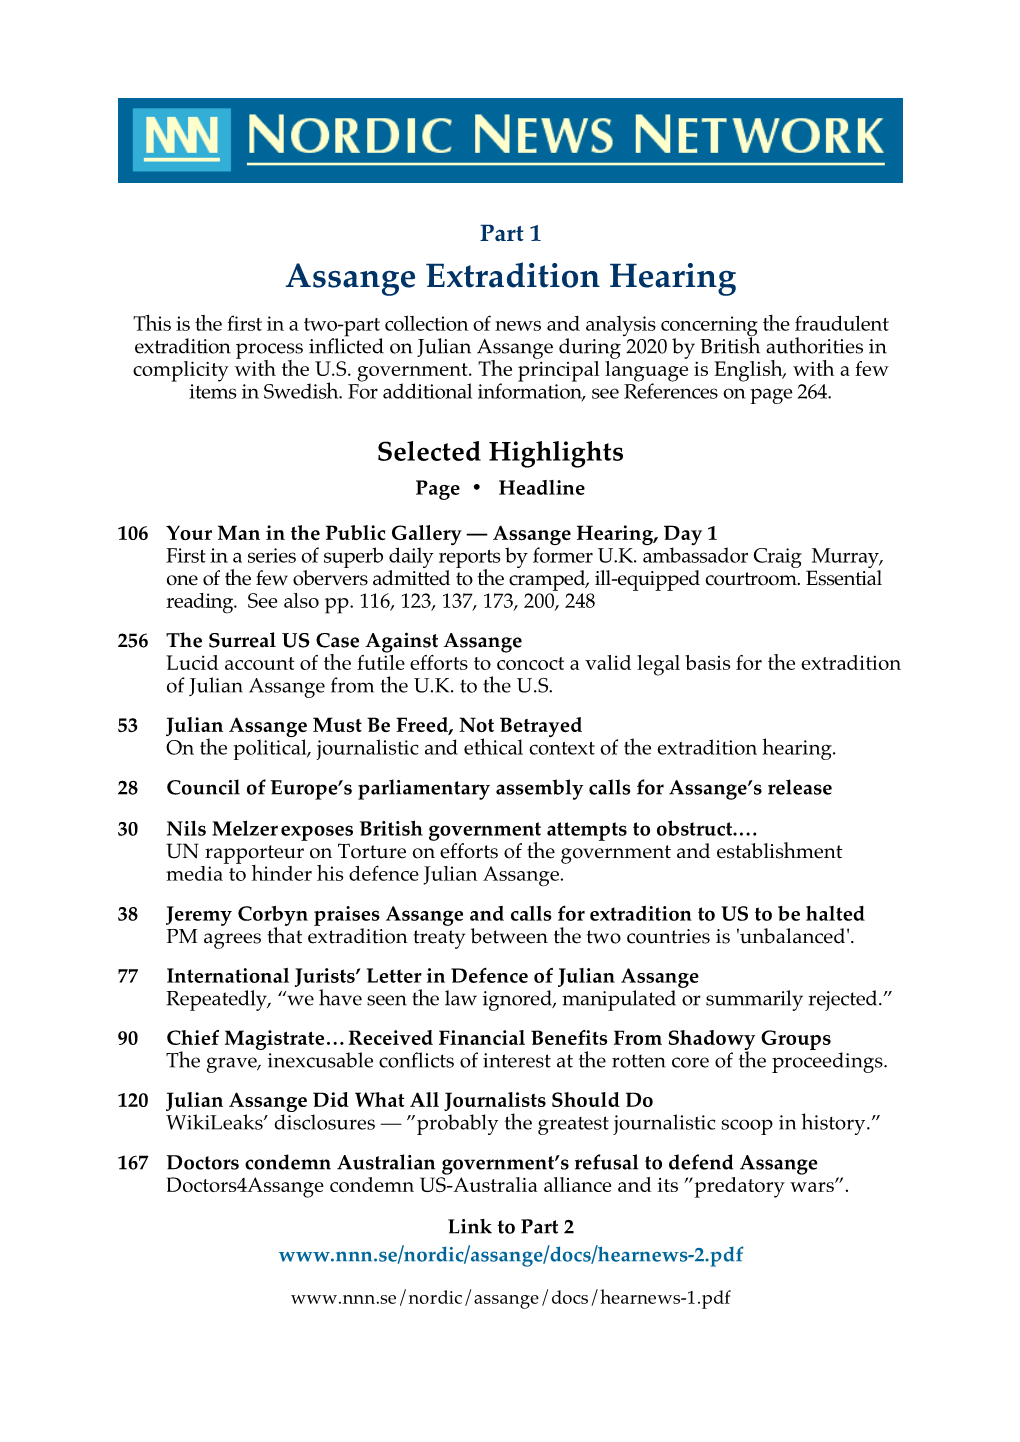 Assange Extradition Hearing